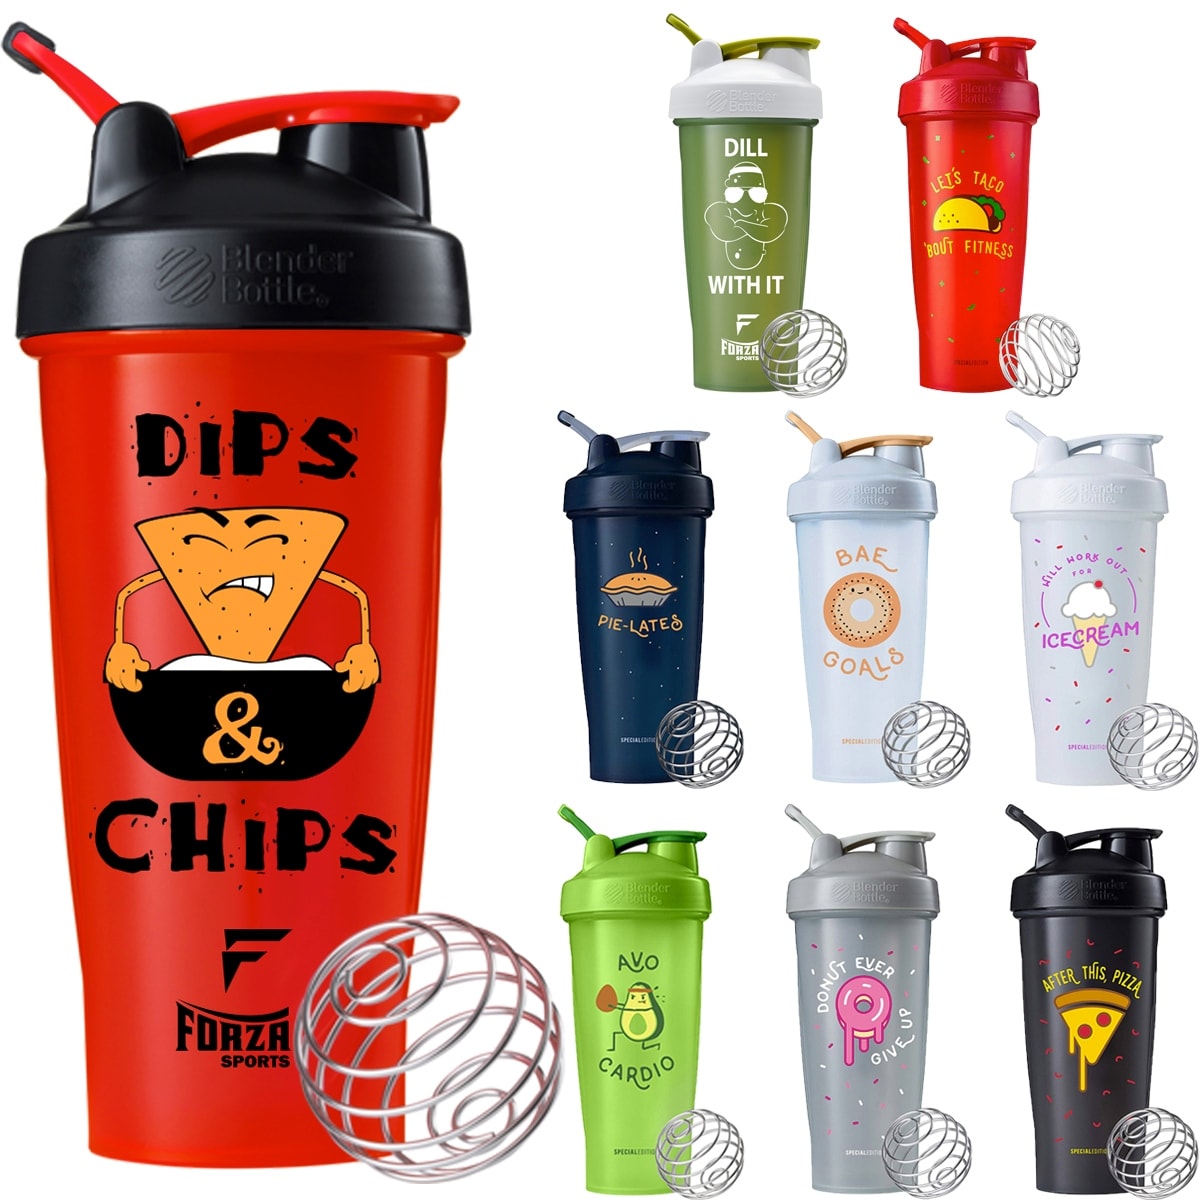 https://ak1.ostkcdn.com/images/products/is/images/direct/baaef1eacc5a28a72053c2abd82a20d7e1240739/Blender-Bottle-Foodie-Special-Edition-28-oz.-Shaker-Mixer-Cup-with-Loop-Top.jpg